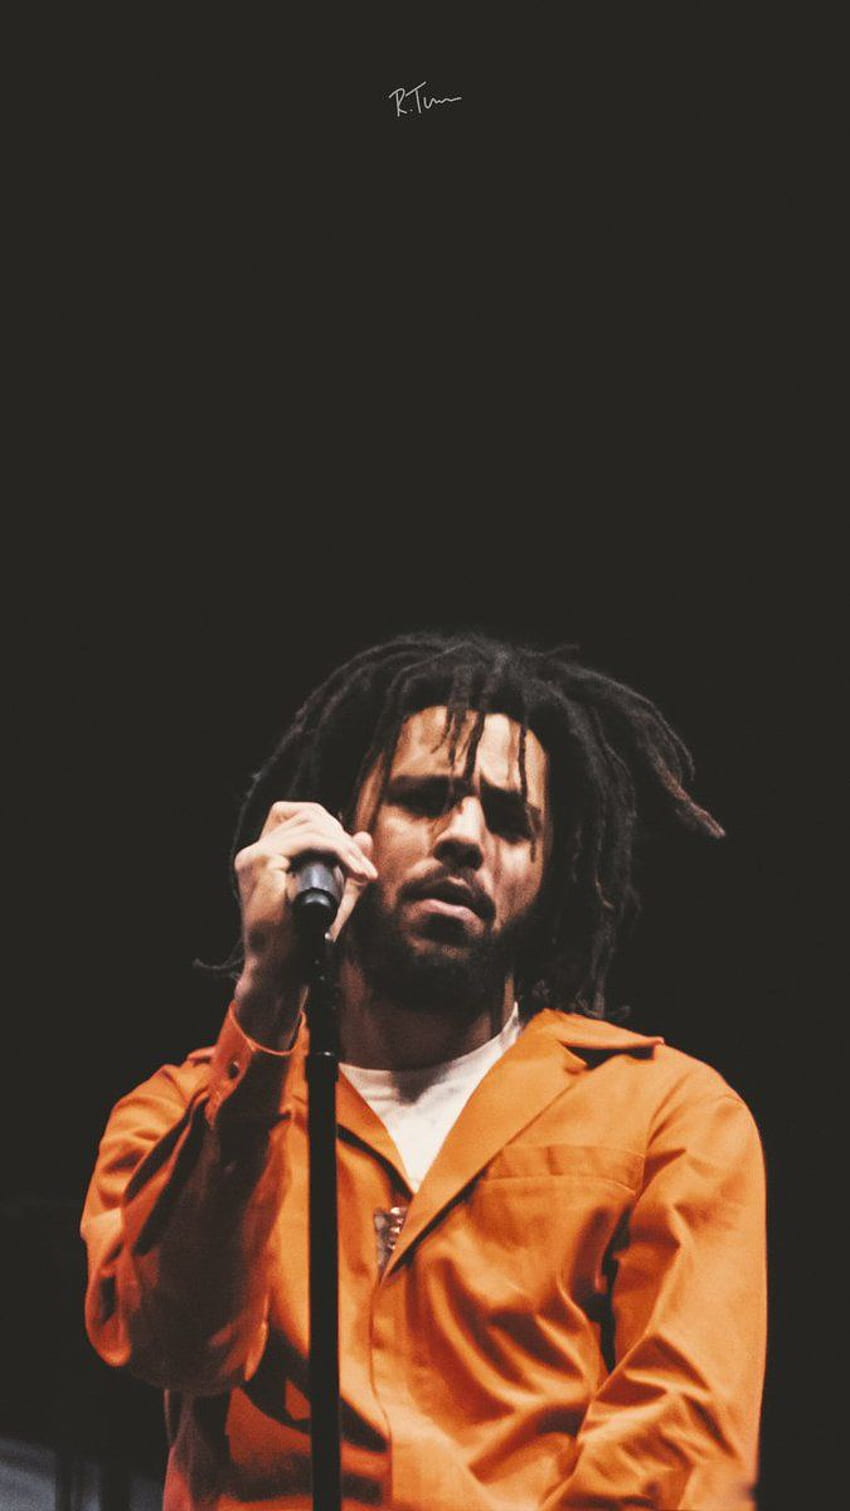 J Cole Wallpapers on WallpaperDog